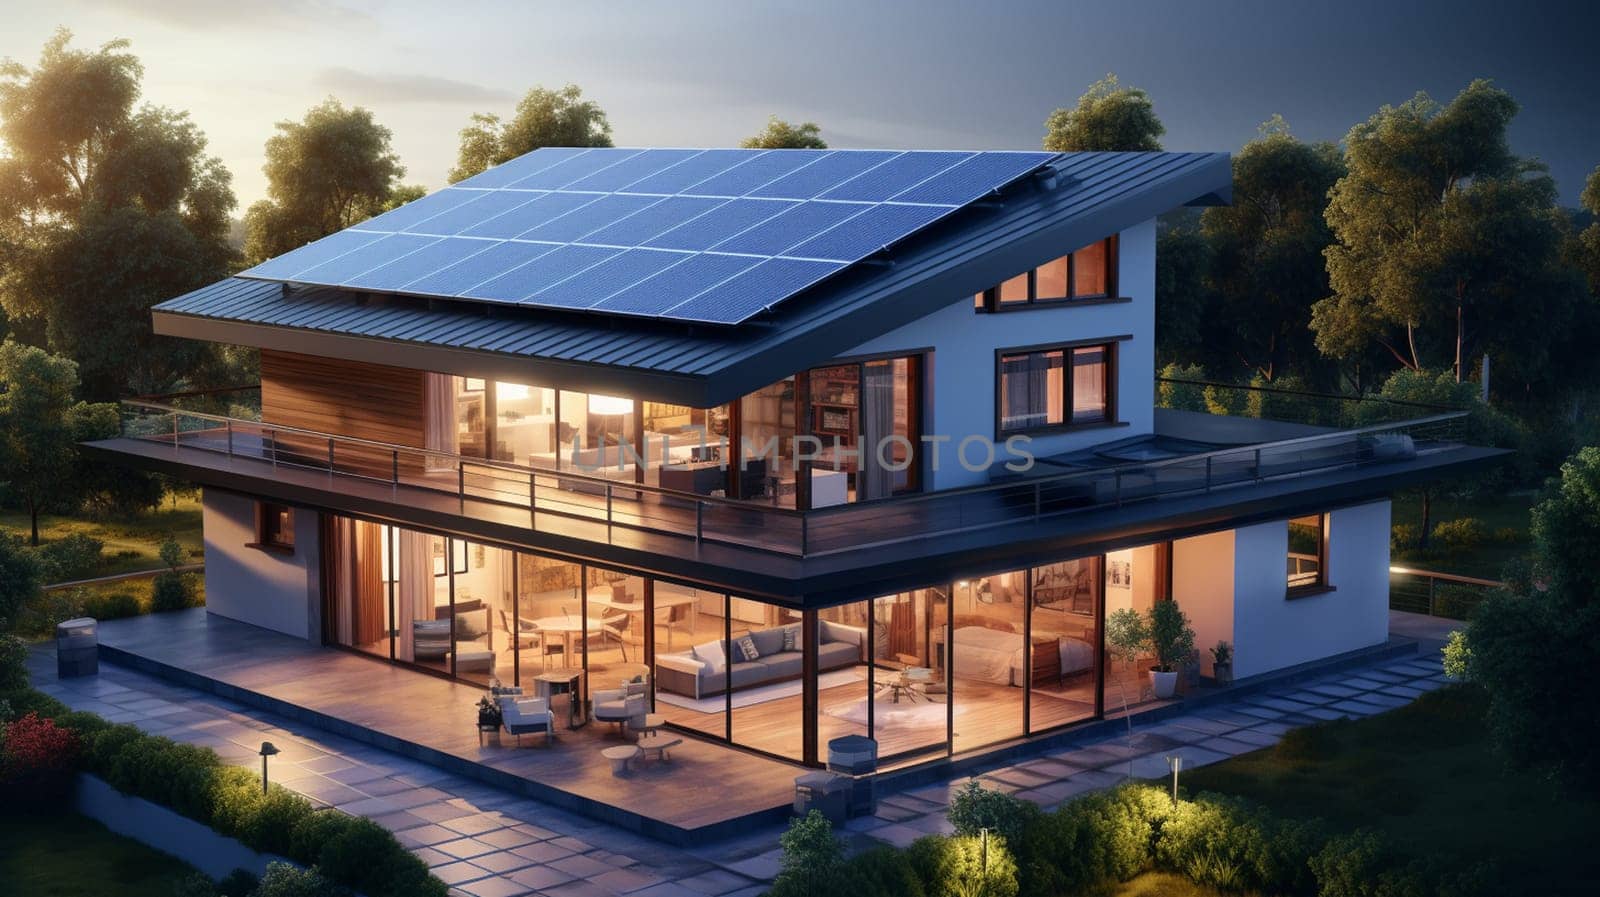 Solar panels on the roof of the house. 3D rendering. by Andelov13